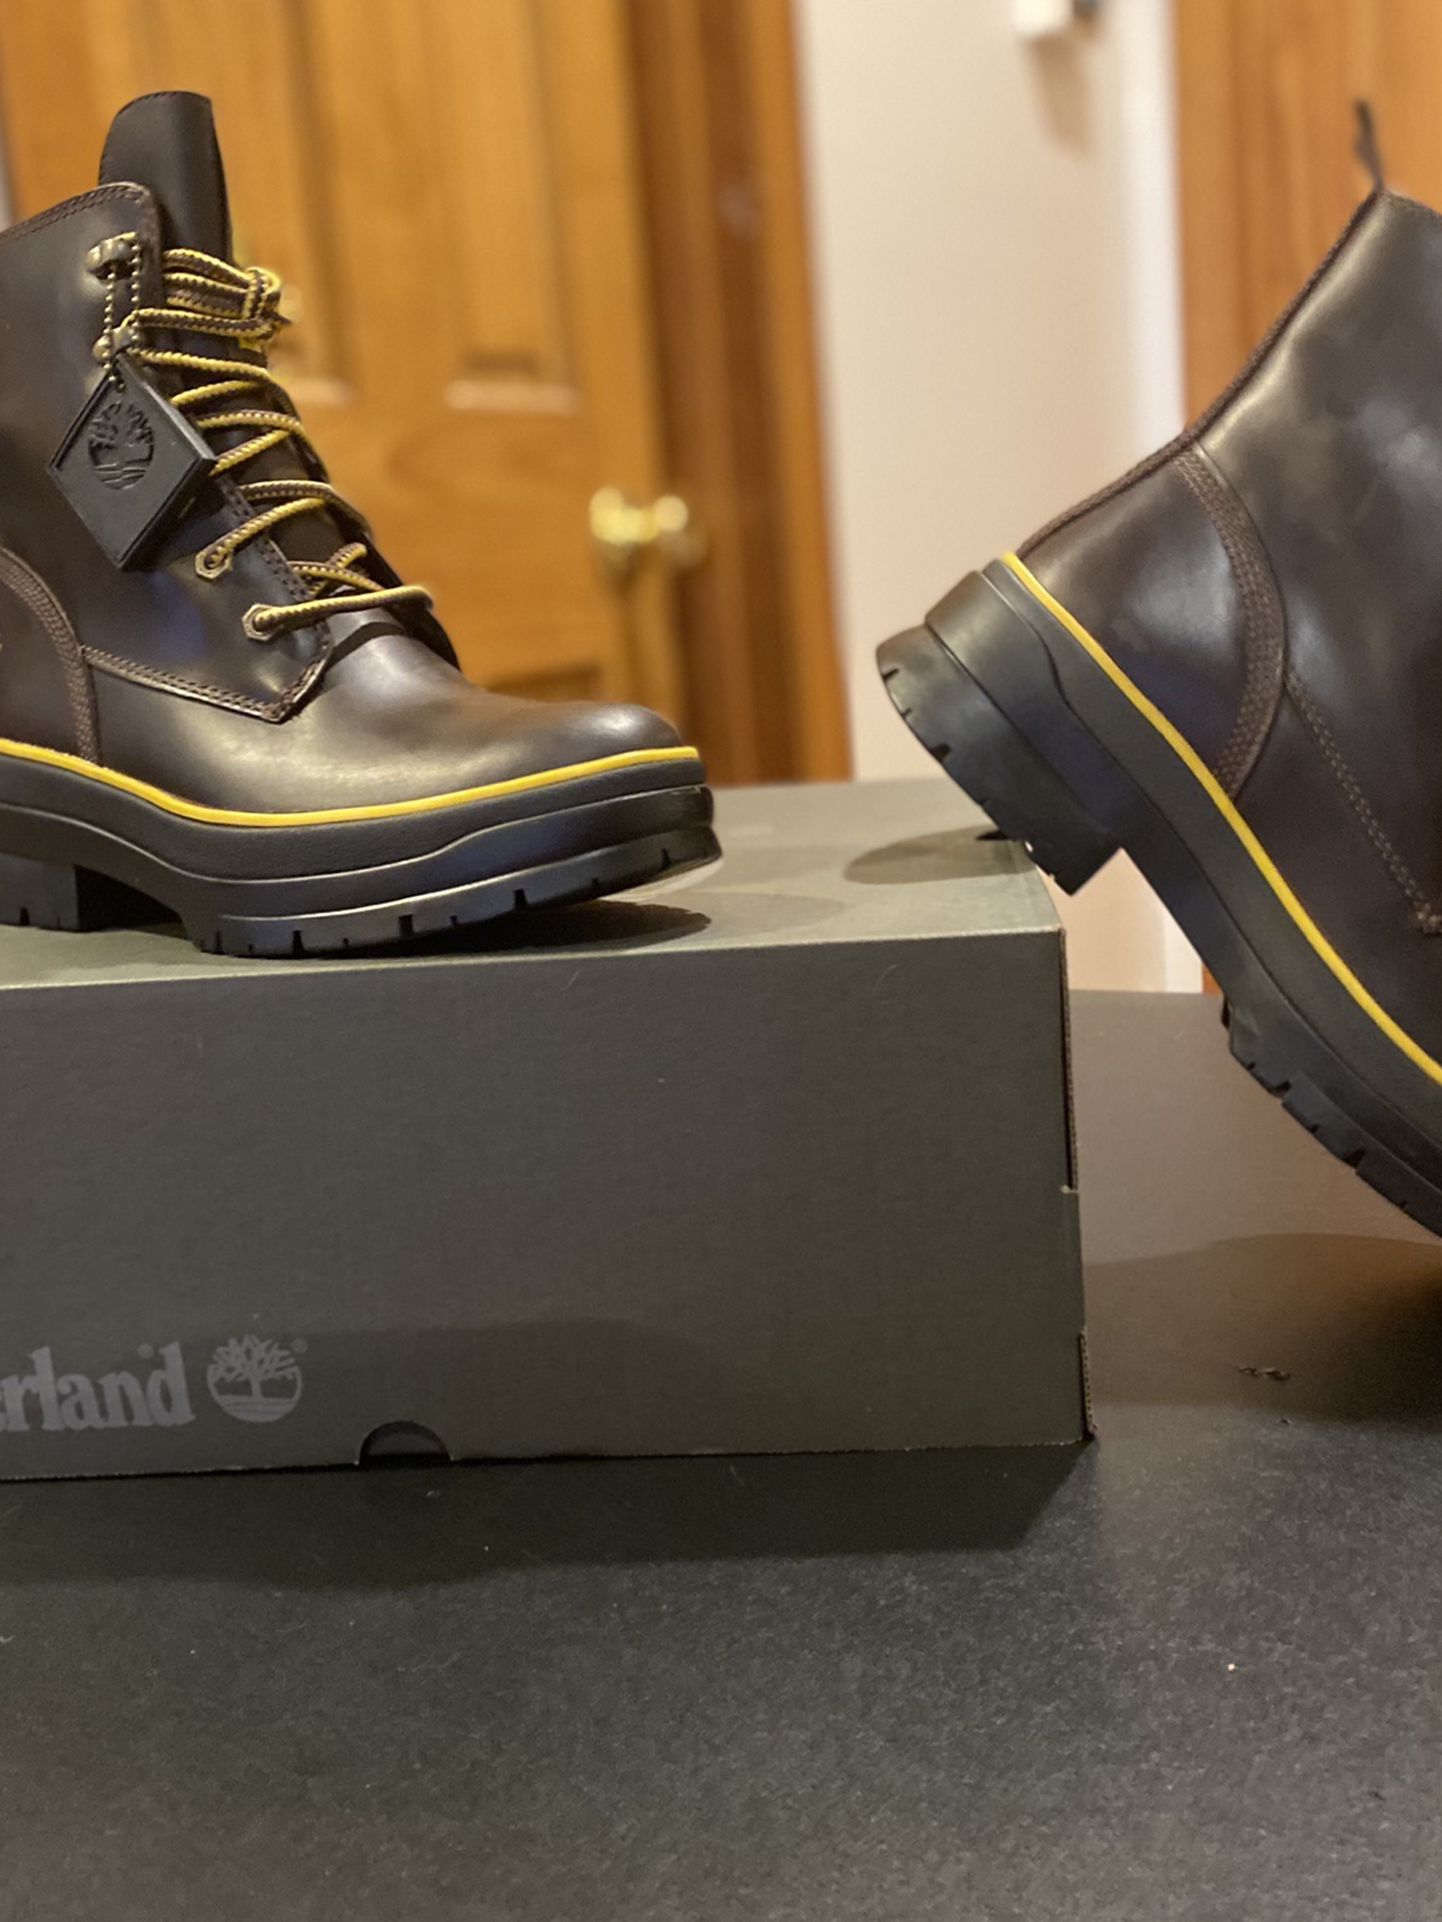 Timberland Women Boots-Brand new In Box 8 1/2